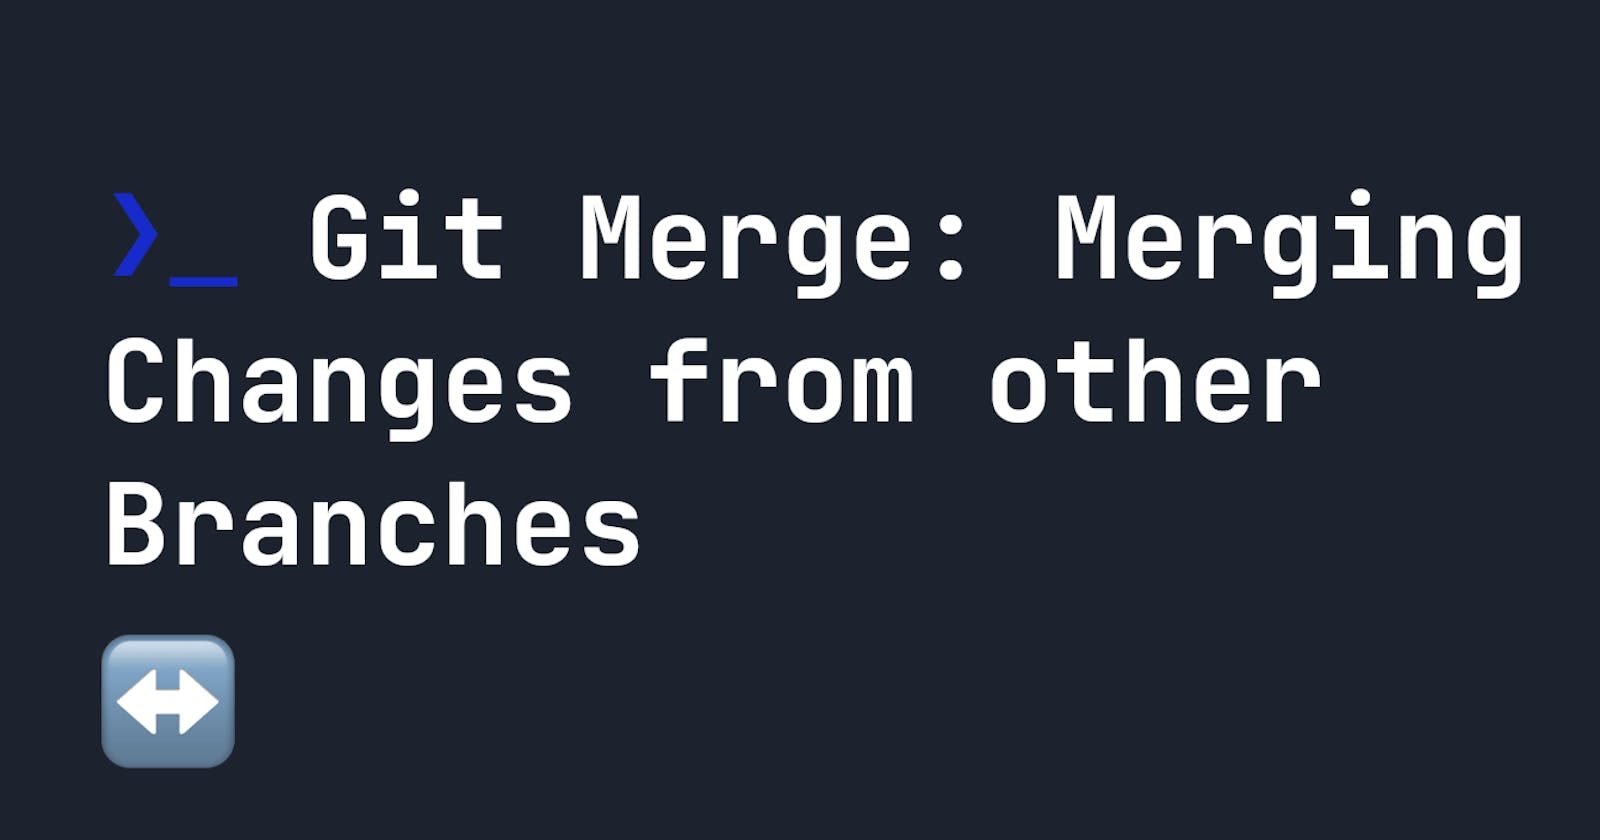 Git Merge: Merging Changes from other Branches